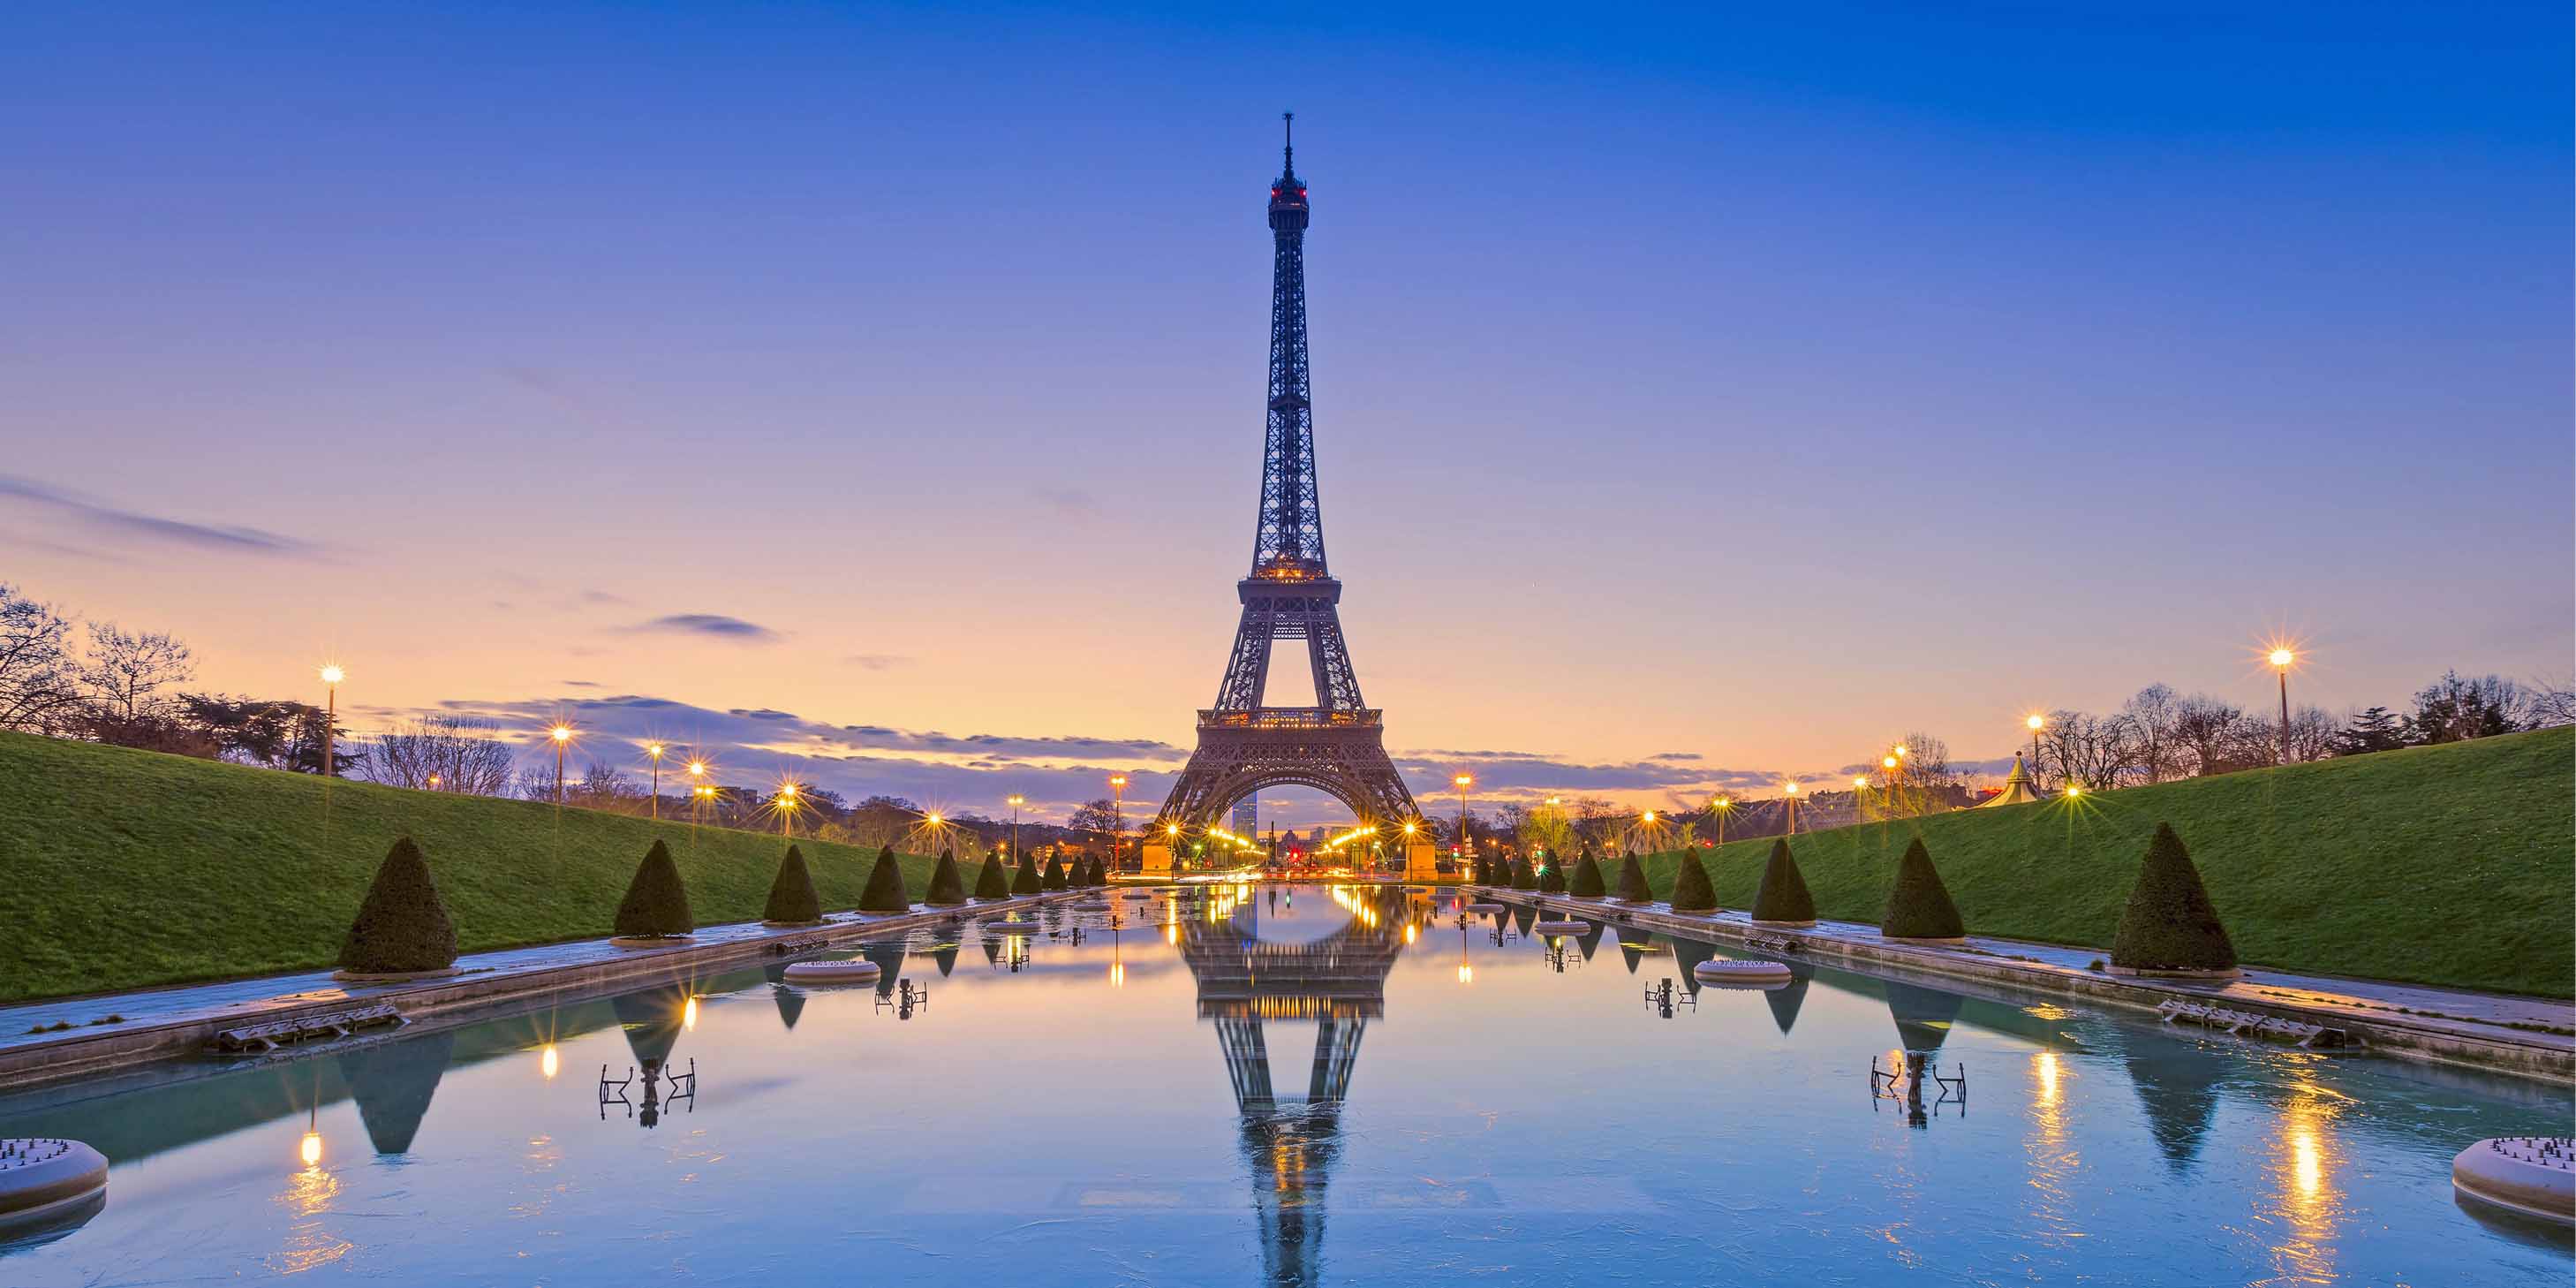 The Eiffel Tower in Paris at dusk with a body of water in front showing the reflection of the tower and lights 